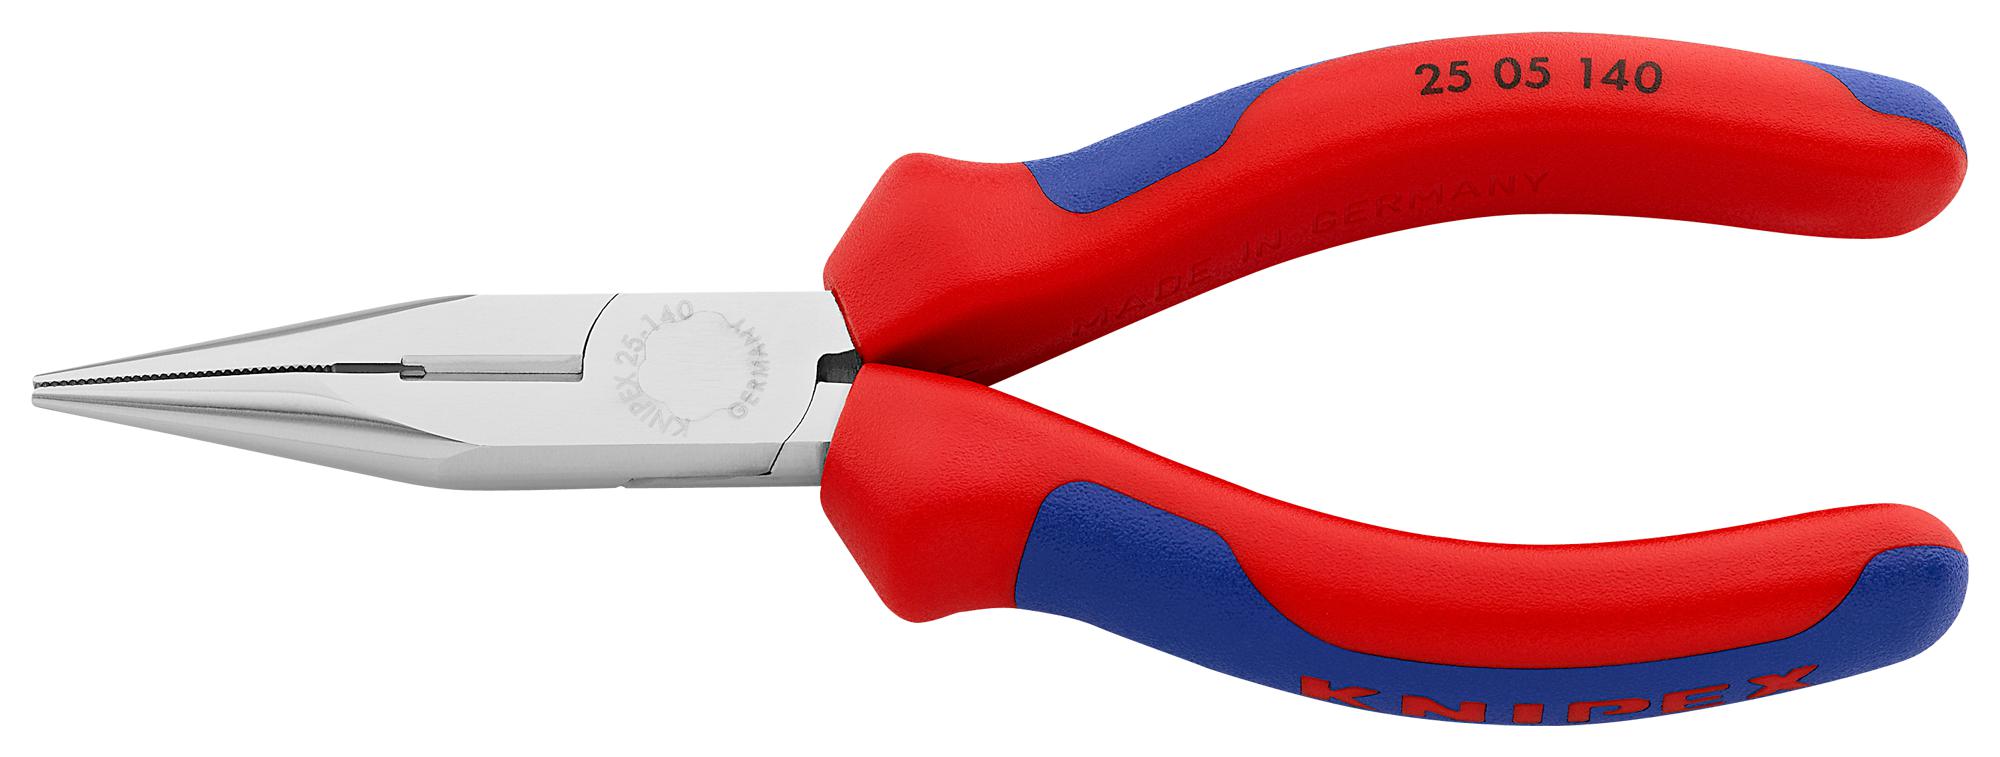 Knipex 25 05 140 Combination Plier, 140mm